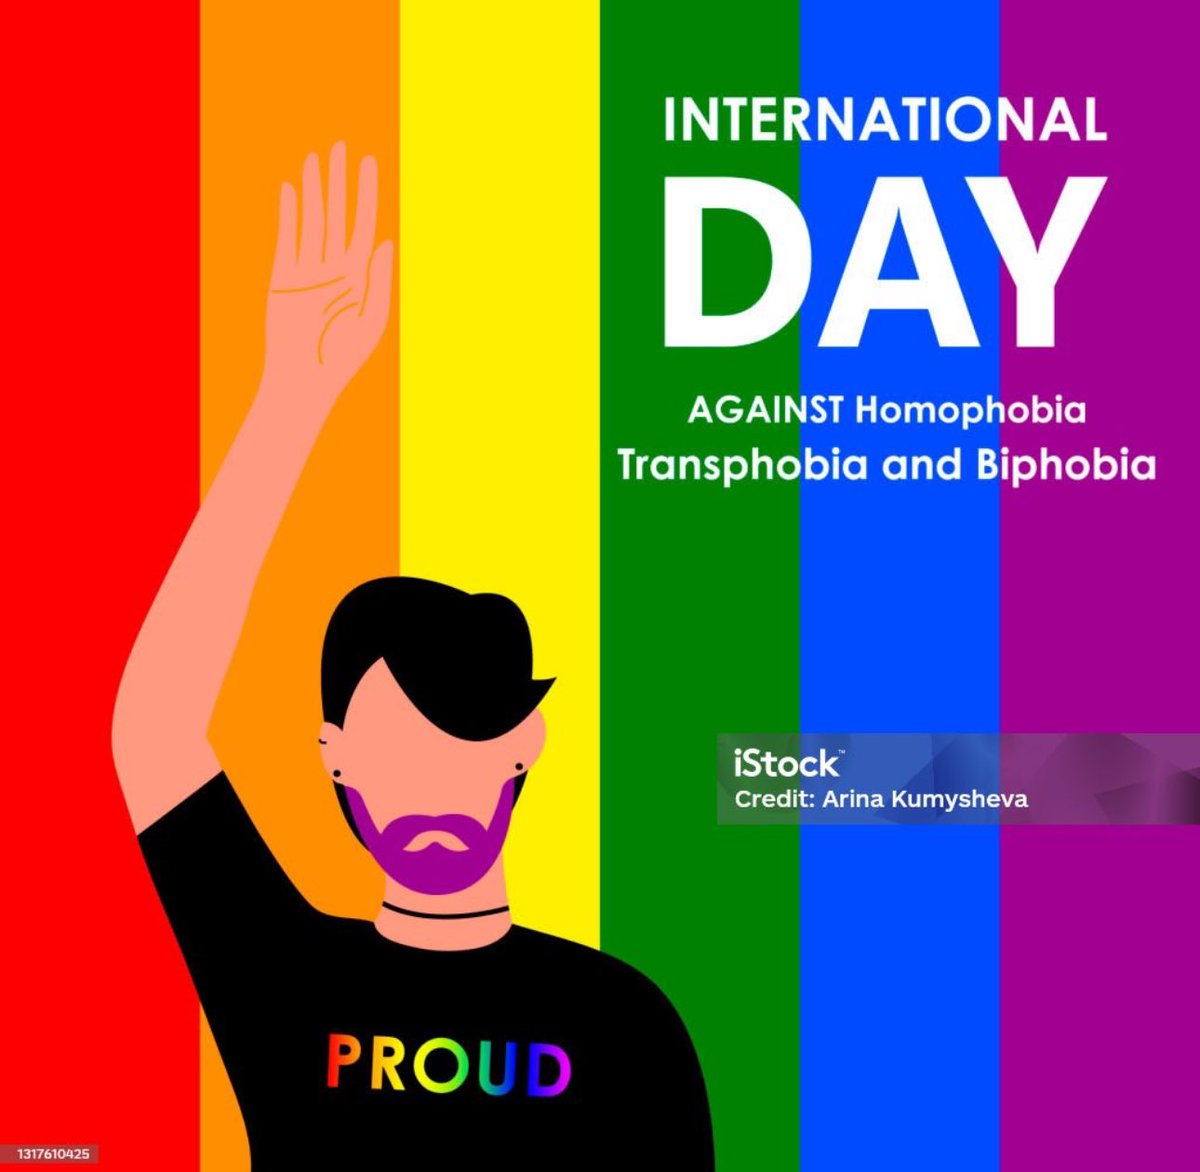 Hey Queers and Weirdos please like & share 🏳️‍🌈🏳️‍🌈 Today is International Day Against Homophobia, Transphobia and Biphobia is a holiday observed around the world on May 17. The event is held every year to help raise awareness about L.G.B.T.Q. issues. It helps to share information